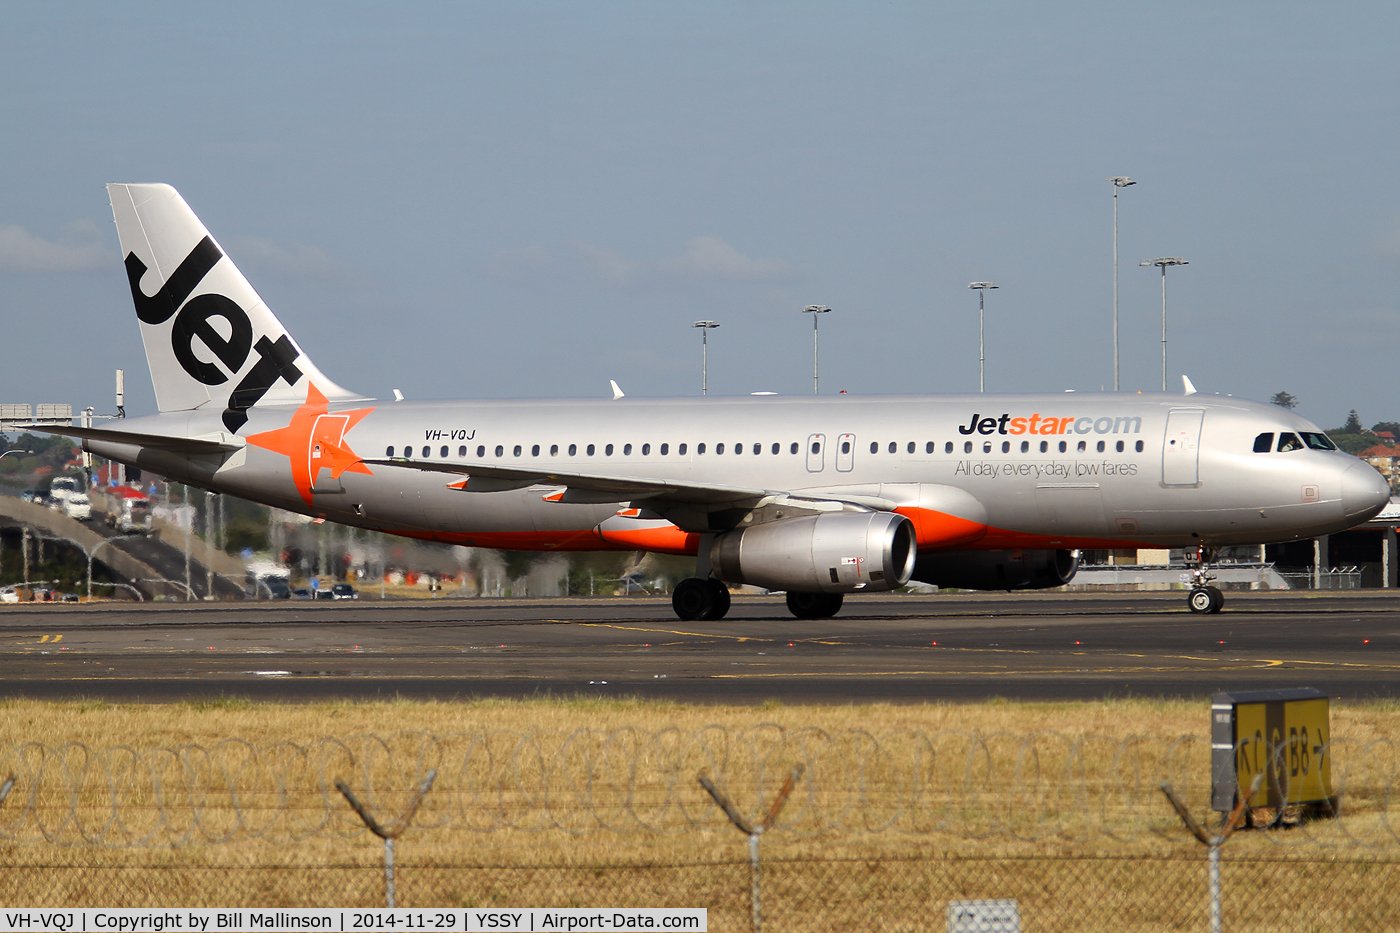 VH-VQJ, 2006 Airbus A320-232 C/N 2703, taxiing from 34L